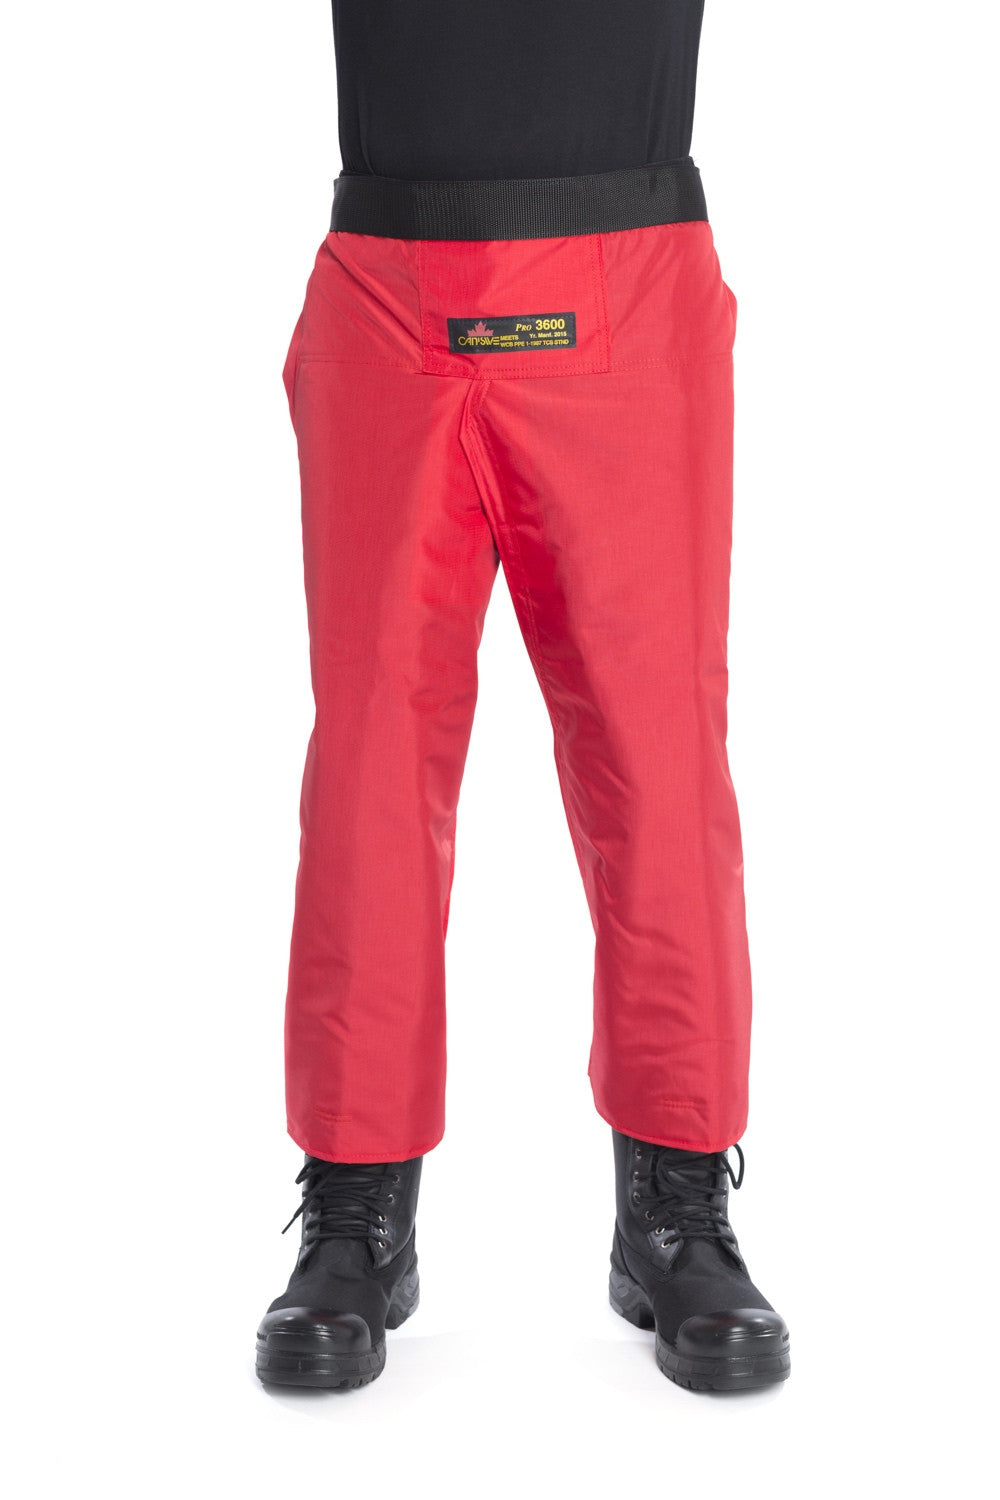 Durable Canswe Safety Chaps